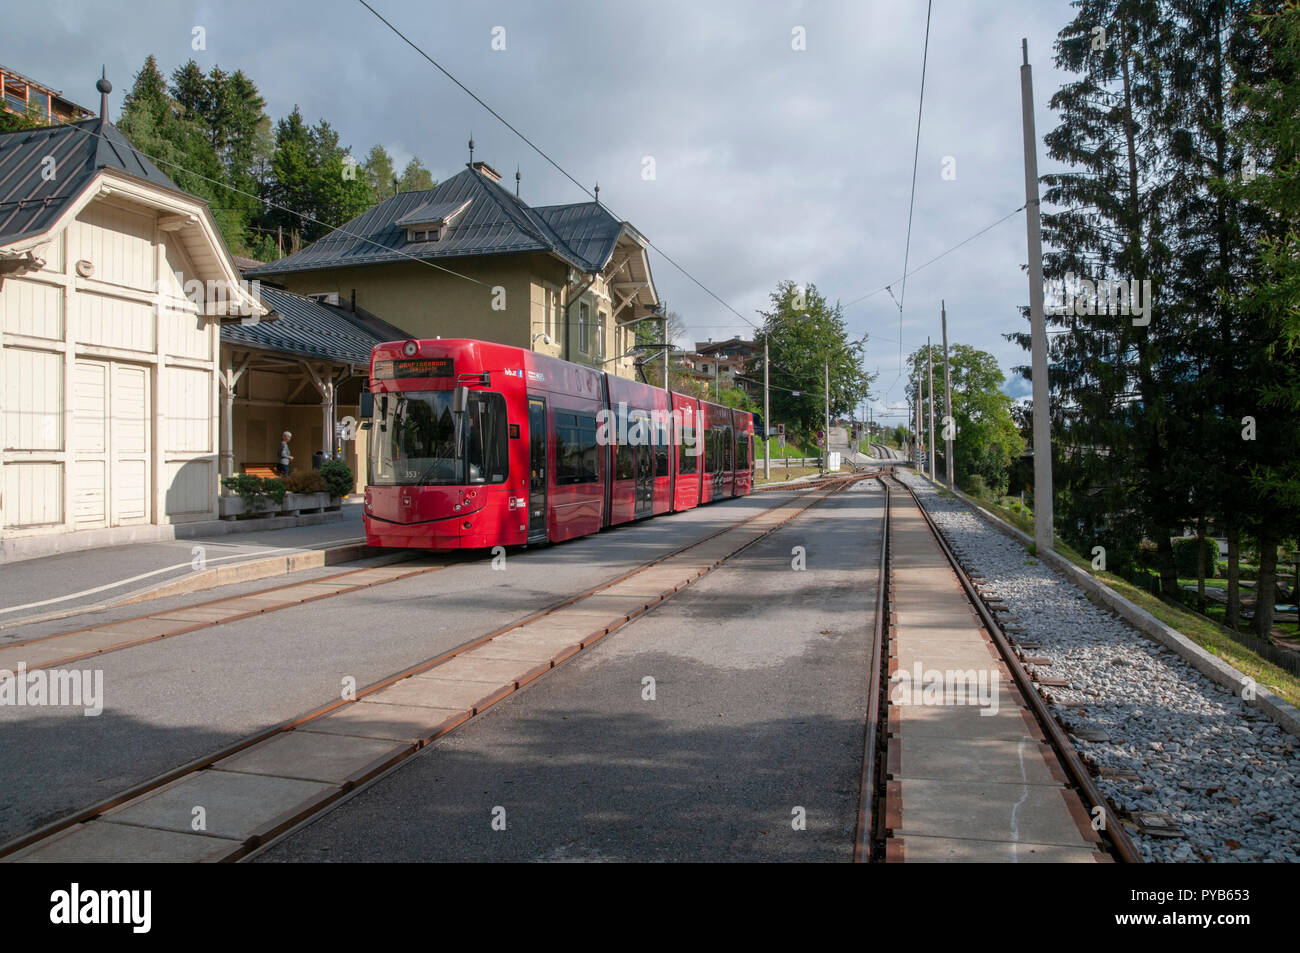 The tram station at Fulpmes, a village and a municipality in Stubaital, Tyrol, Austria. Stock Photo